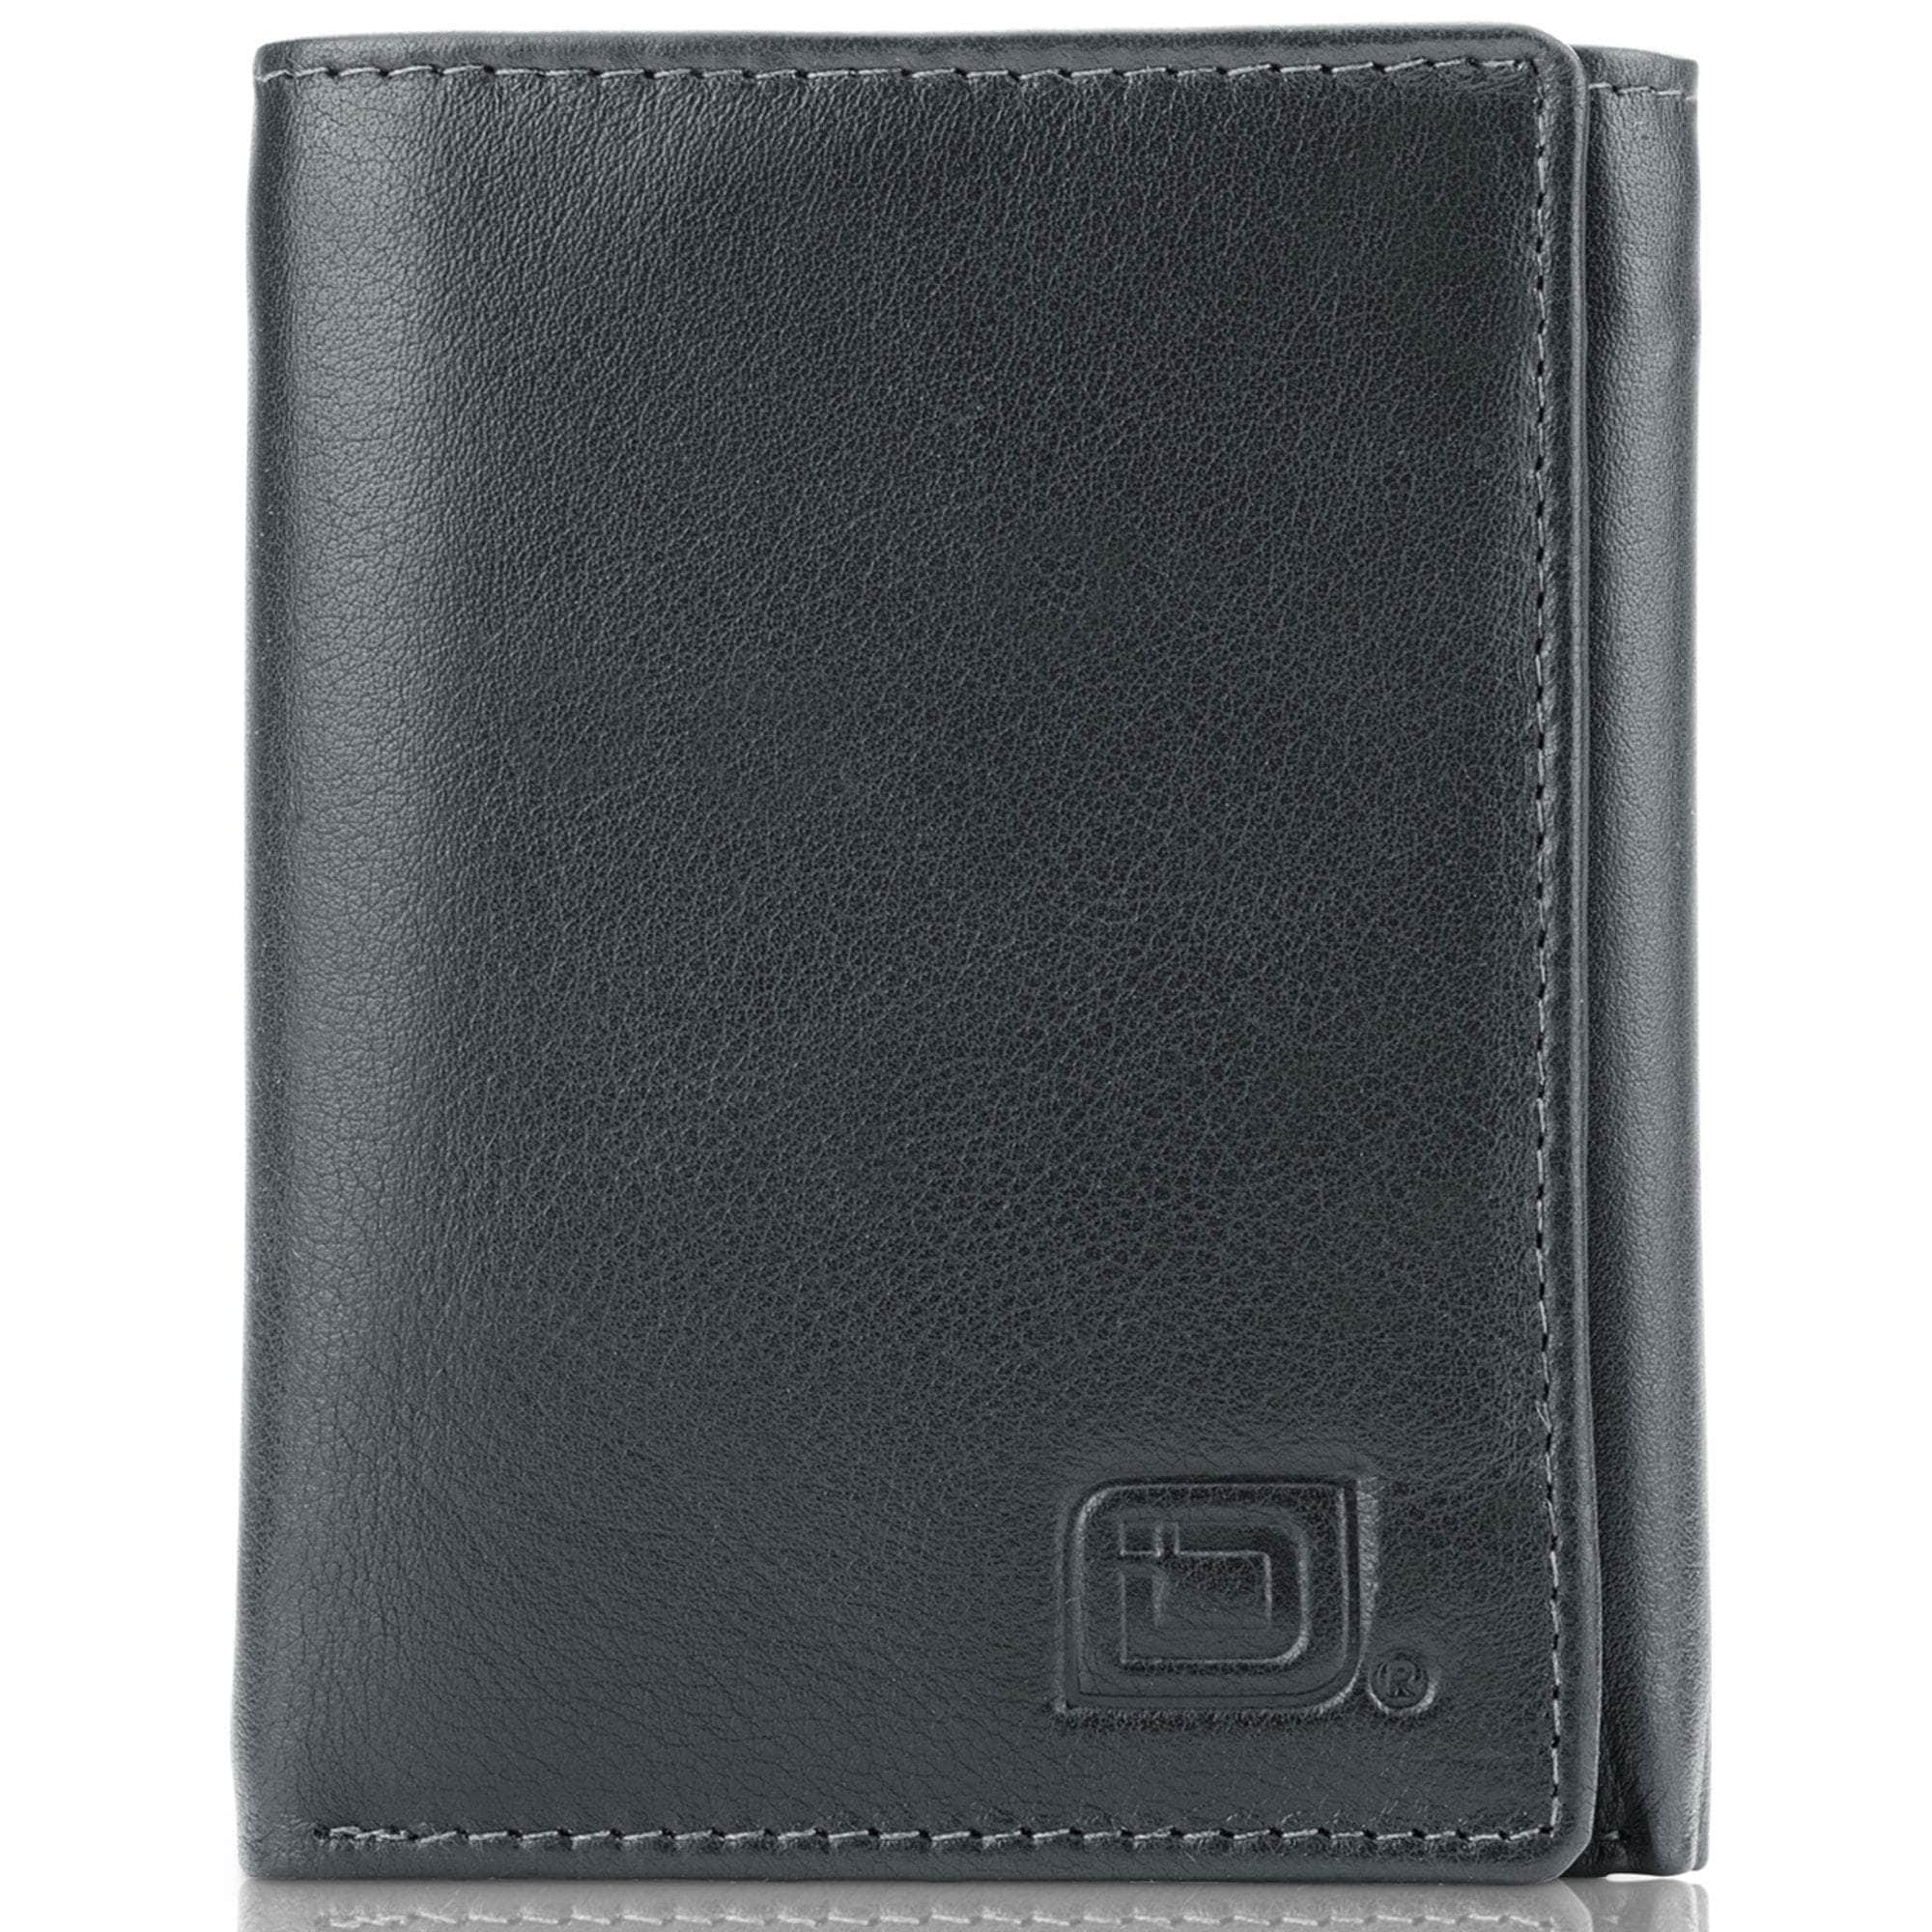 ID Stronghold Men's Wallet Black Mens RFID Wallet - Extra Capacity Trifold 8 slot with ID Window